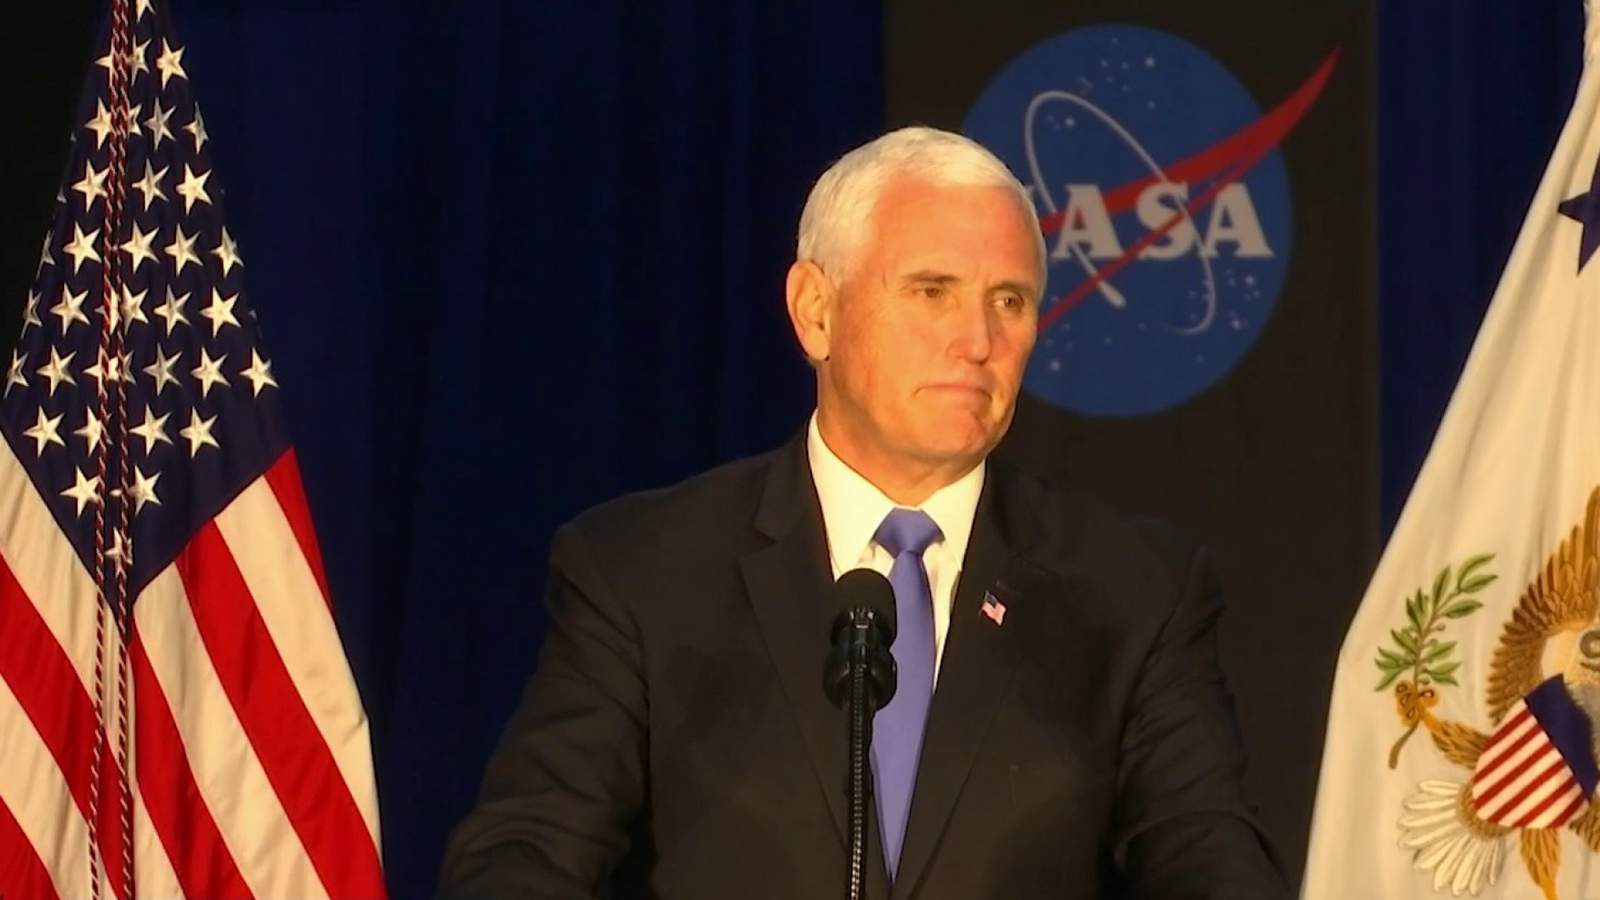 Patrick Space Force Base: Vice President Mike Pence officially changes name